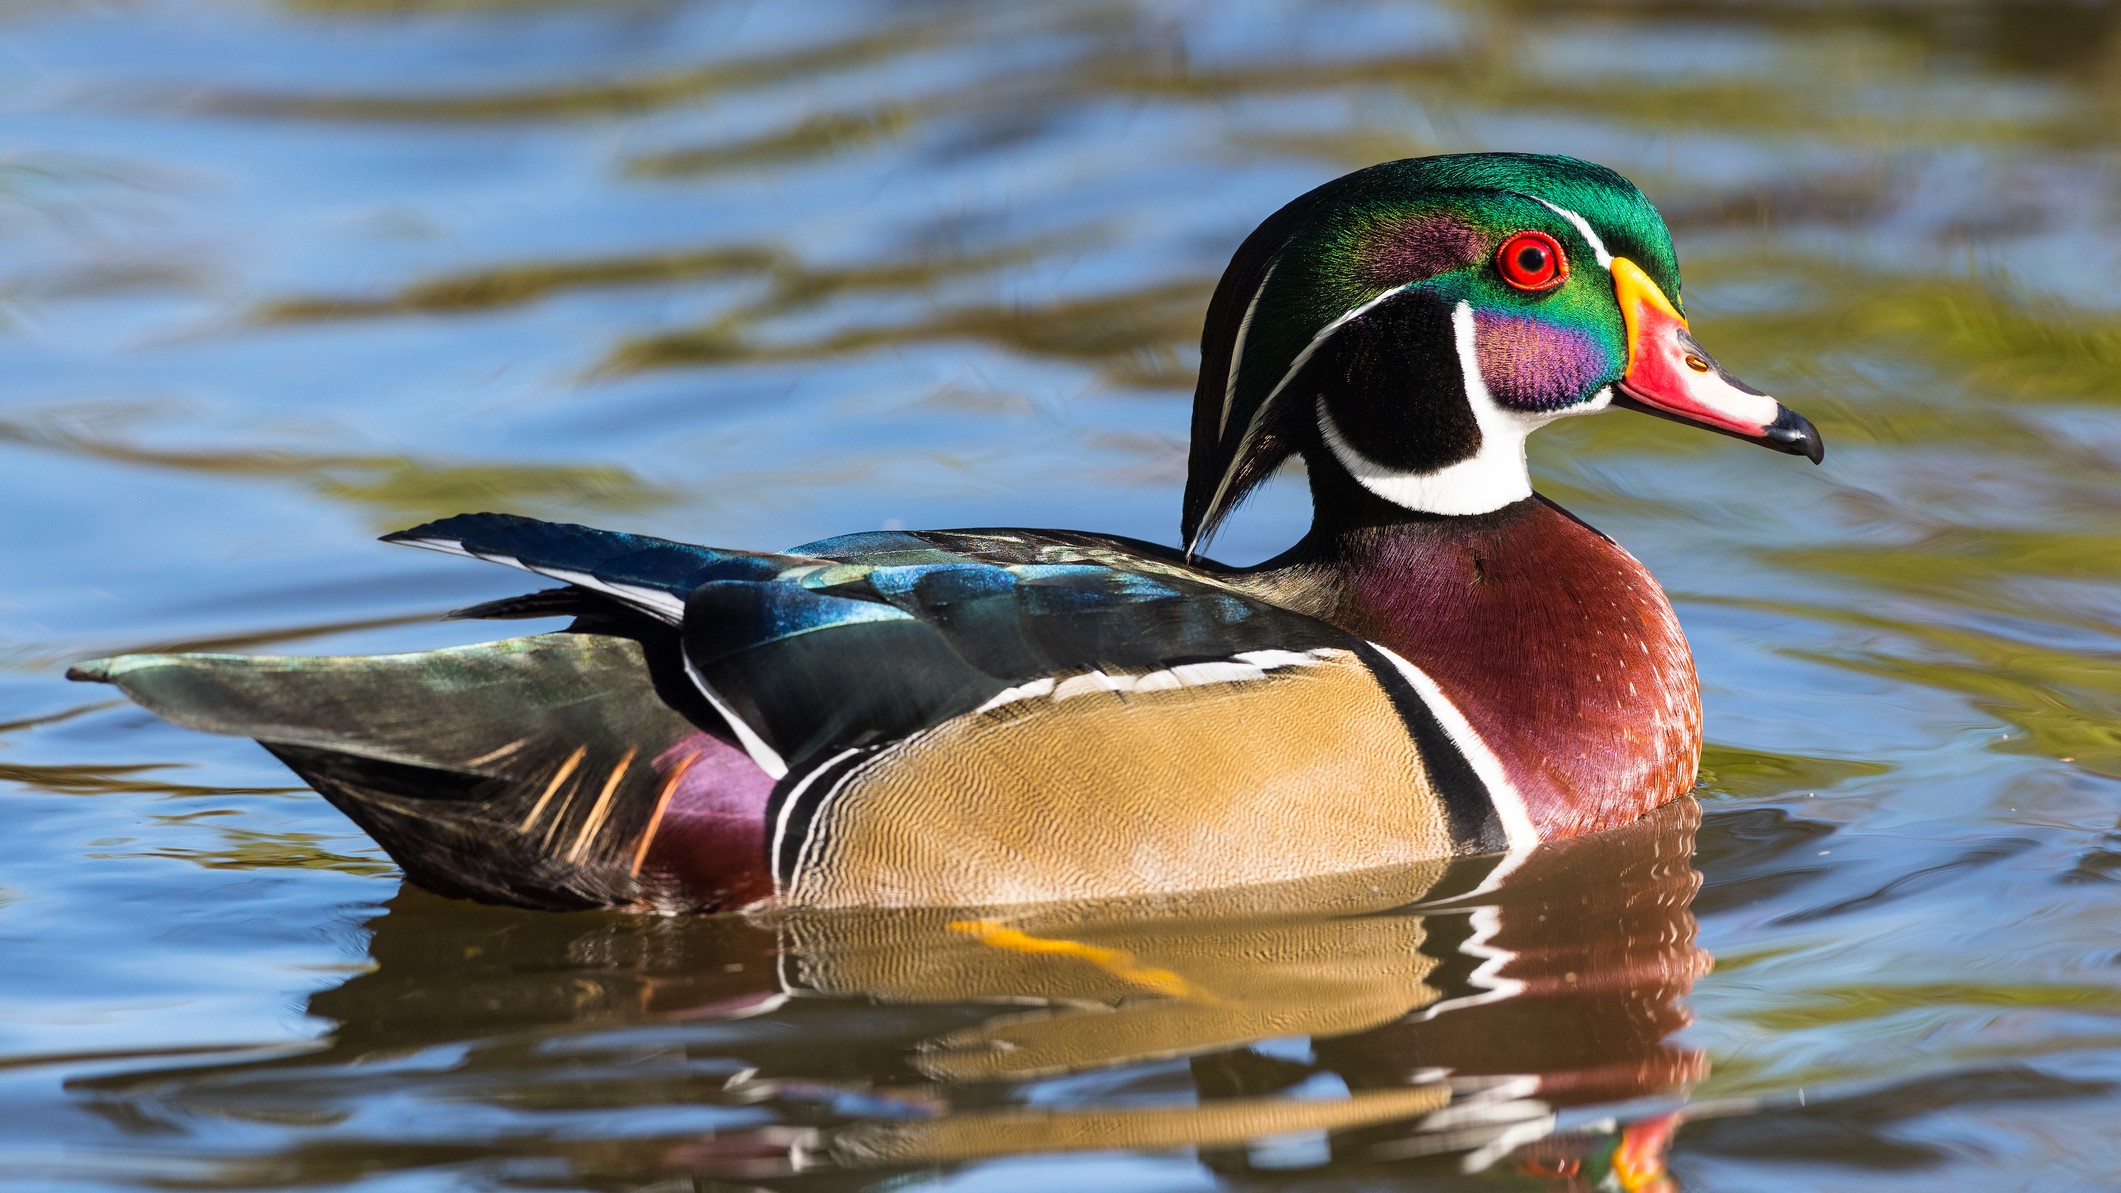 A male wood duck swimming in water with his colorful feather reflected.